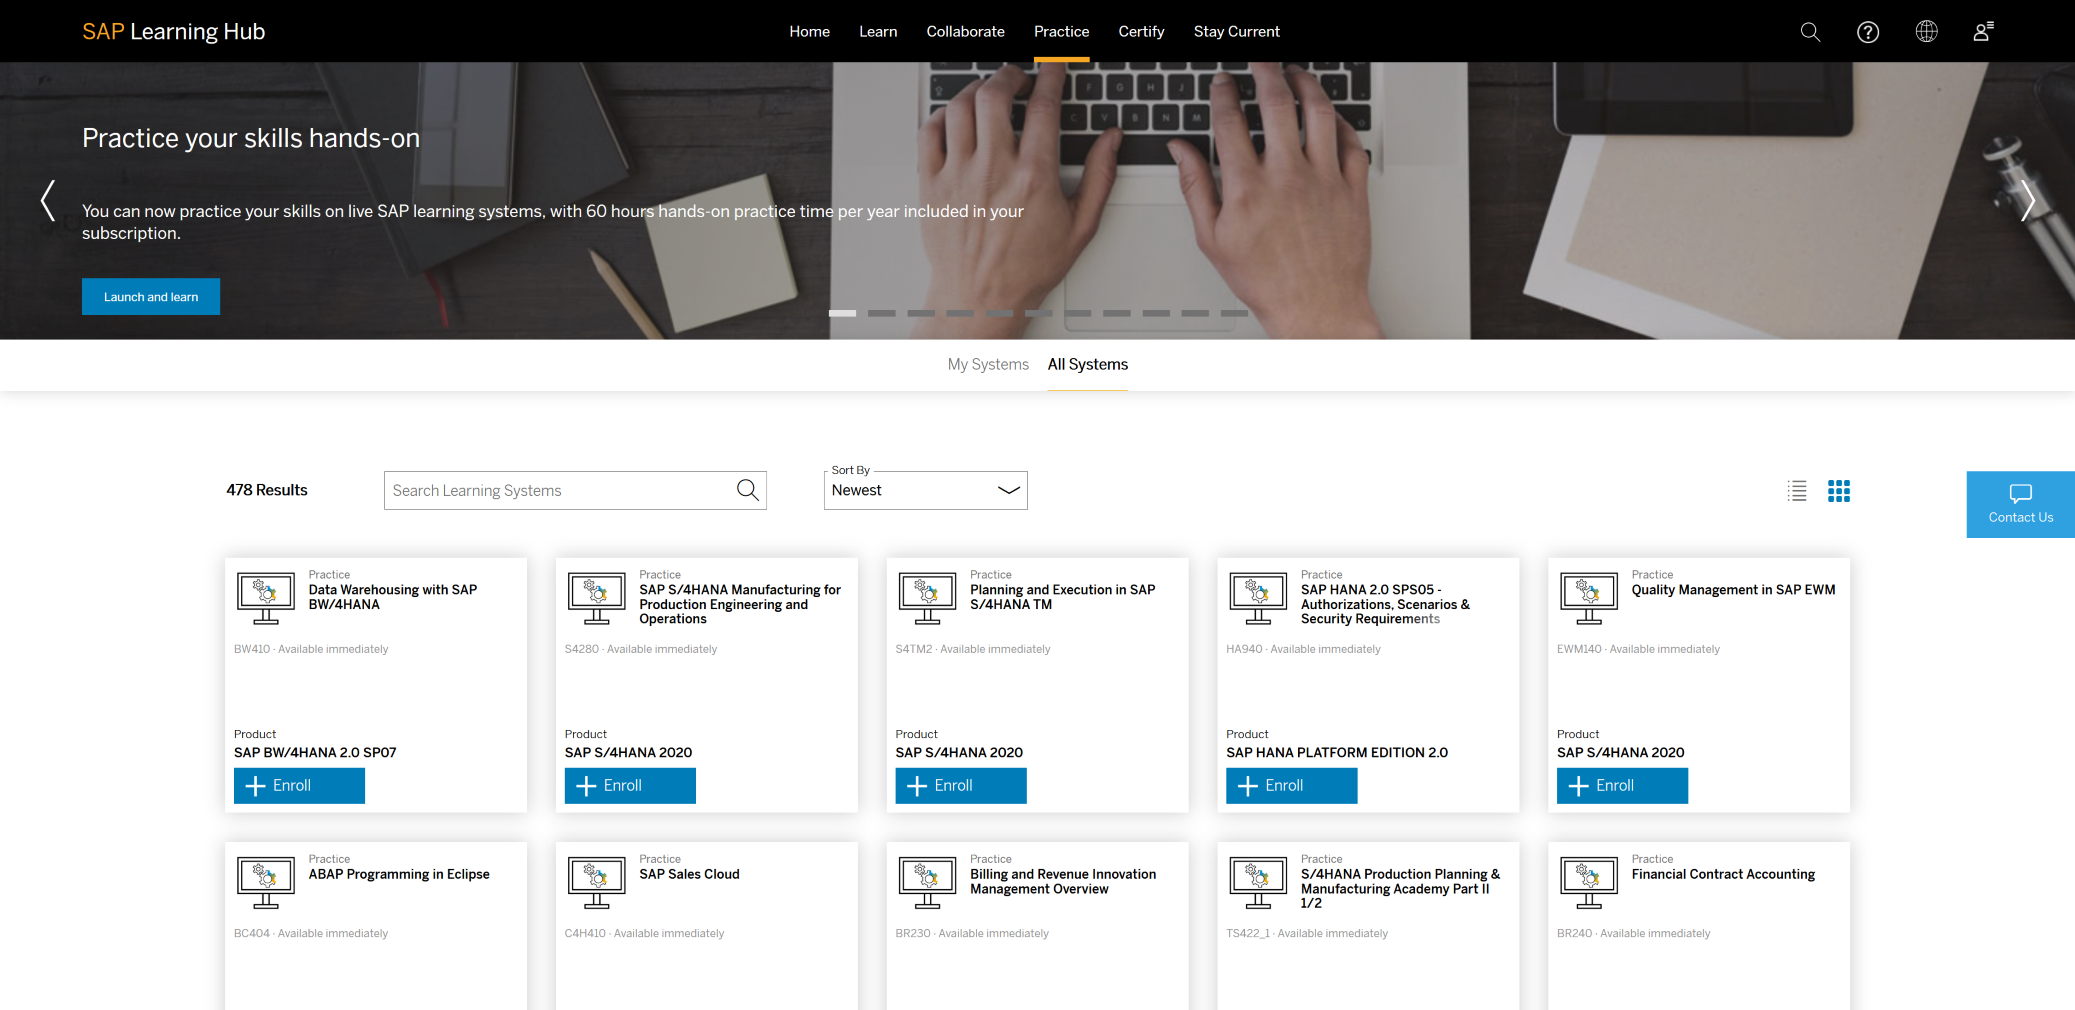 A new learning experience with SAP Learning Hub - SAP Community